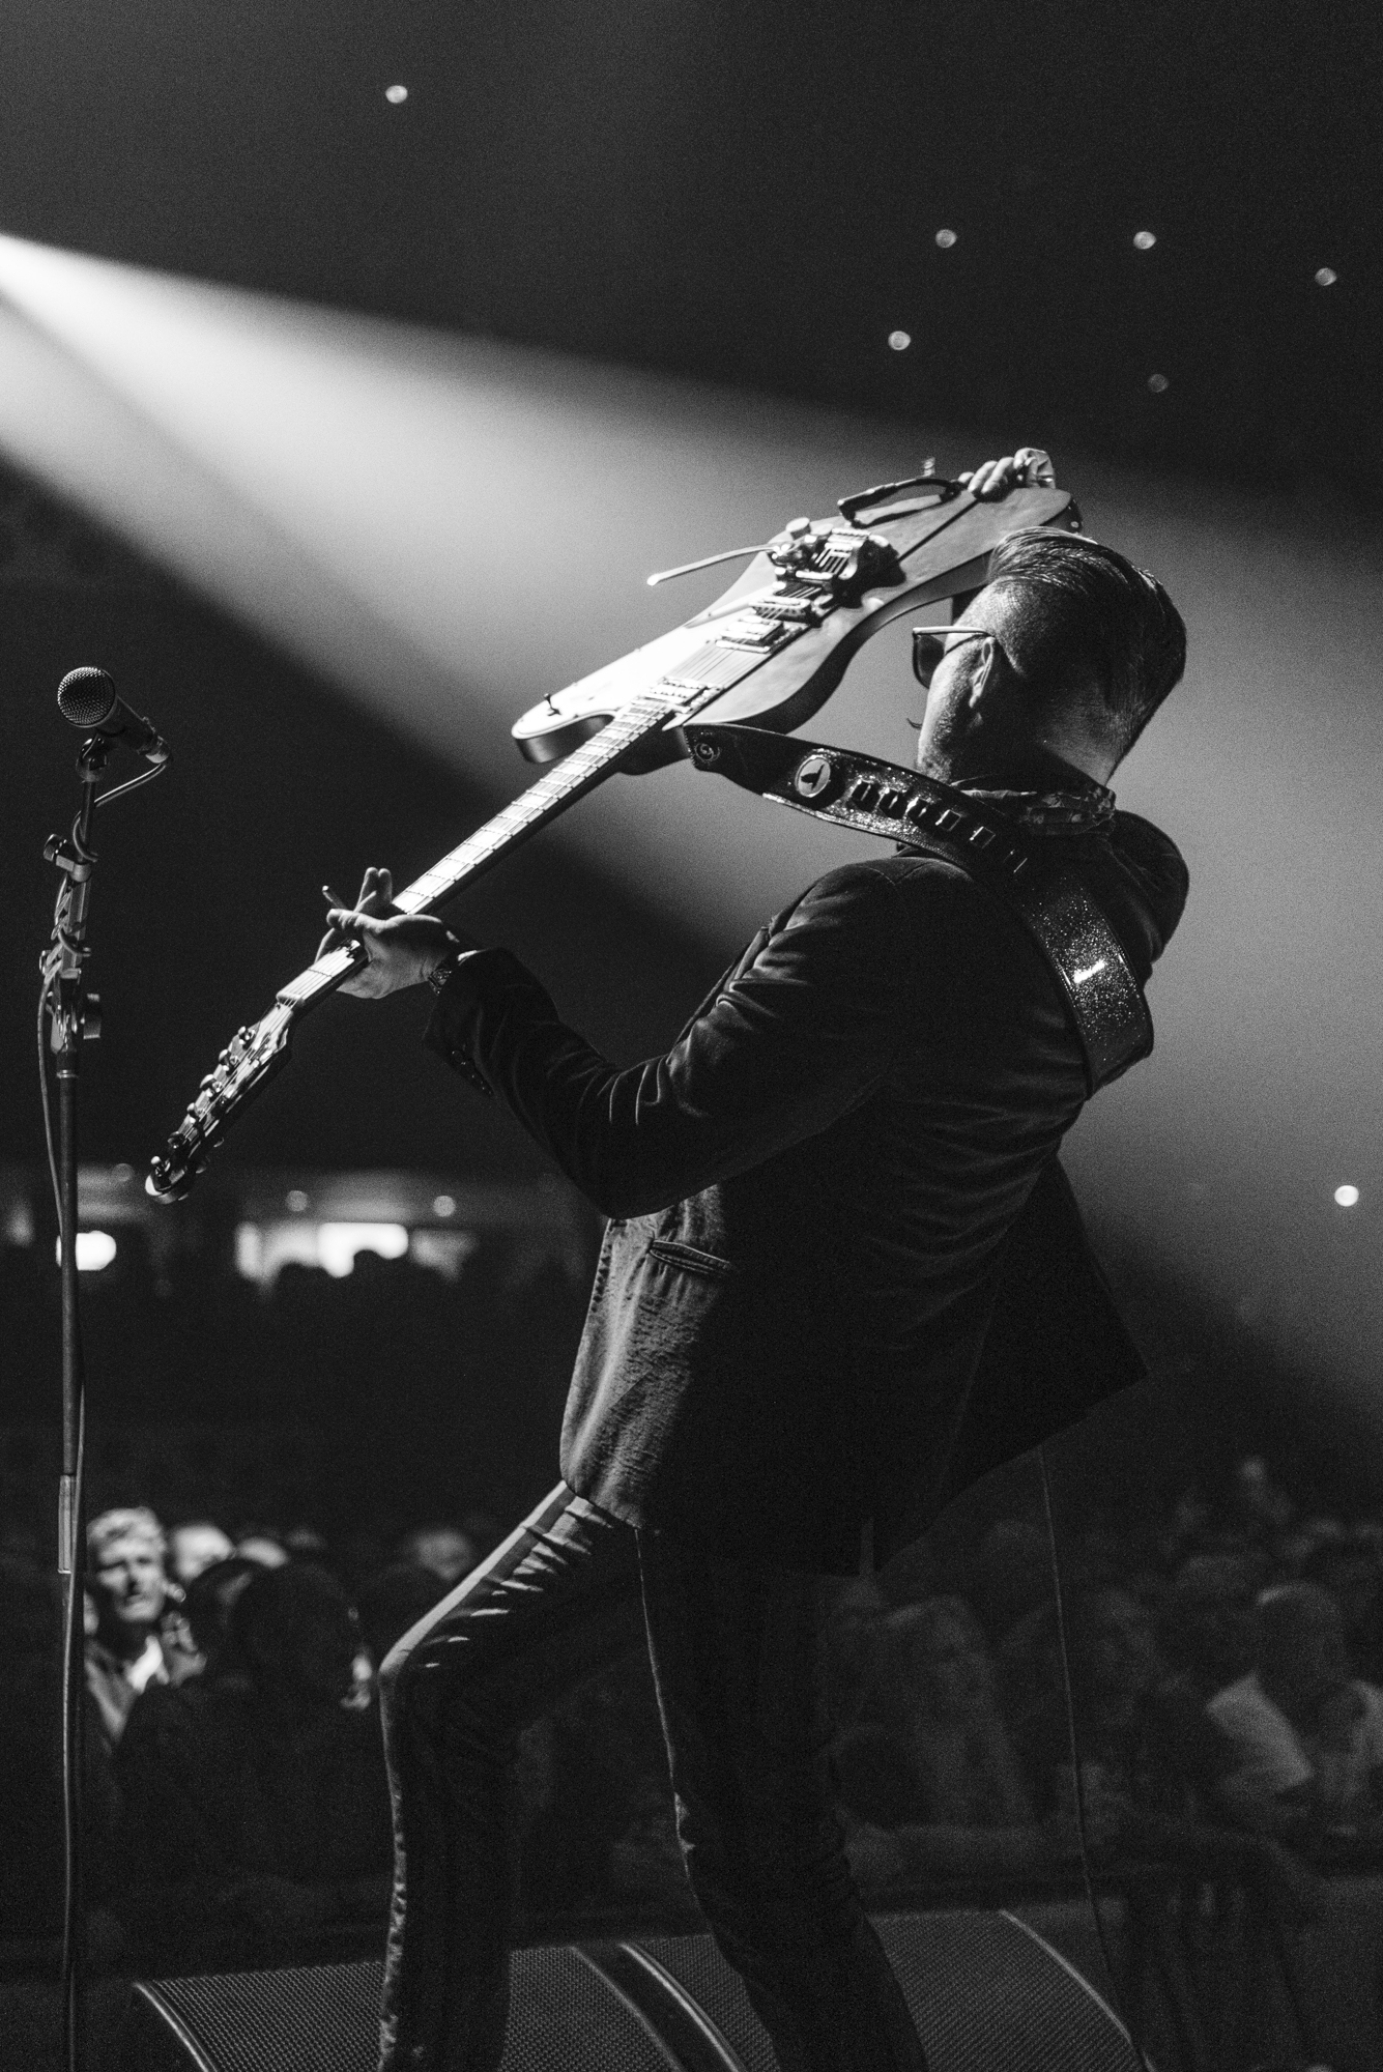 Photography for Rival Sons by Eleanor Jane